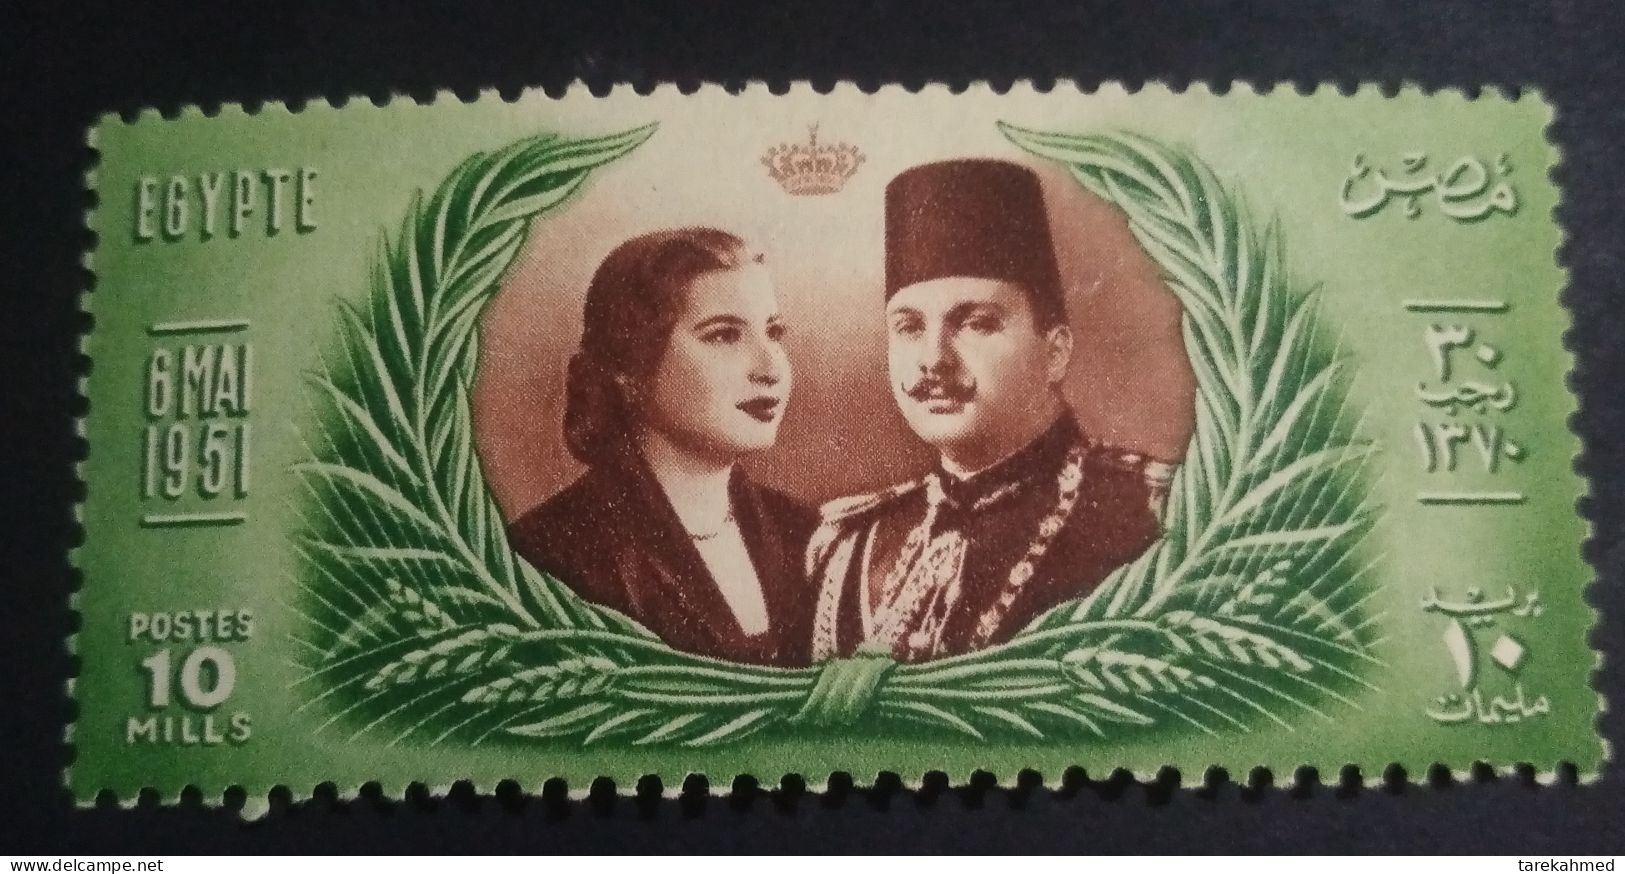 EGYPT 1951 , KING FAROUK & QUEEN NARRIMAN . ROYAL WEDDING , MNH , Watermark Crown And Letter Noon ن ، Original Gum - Nuovi